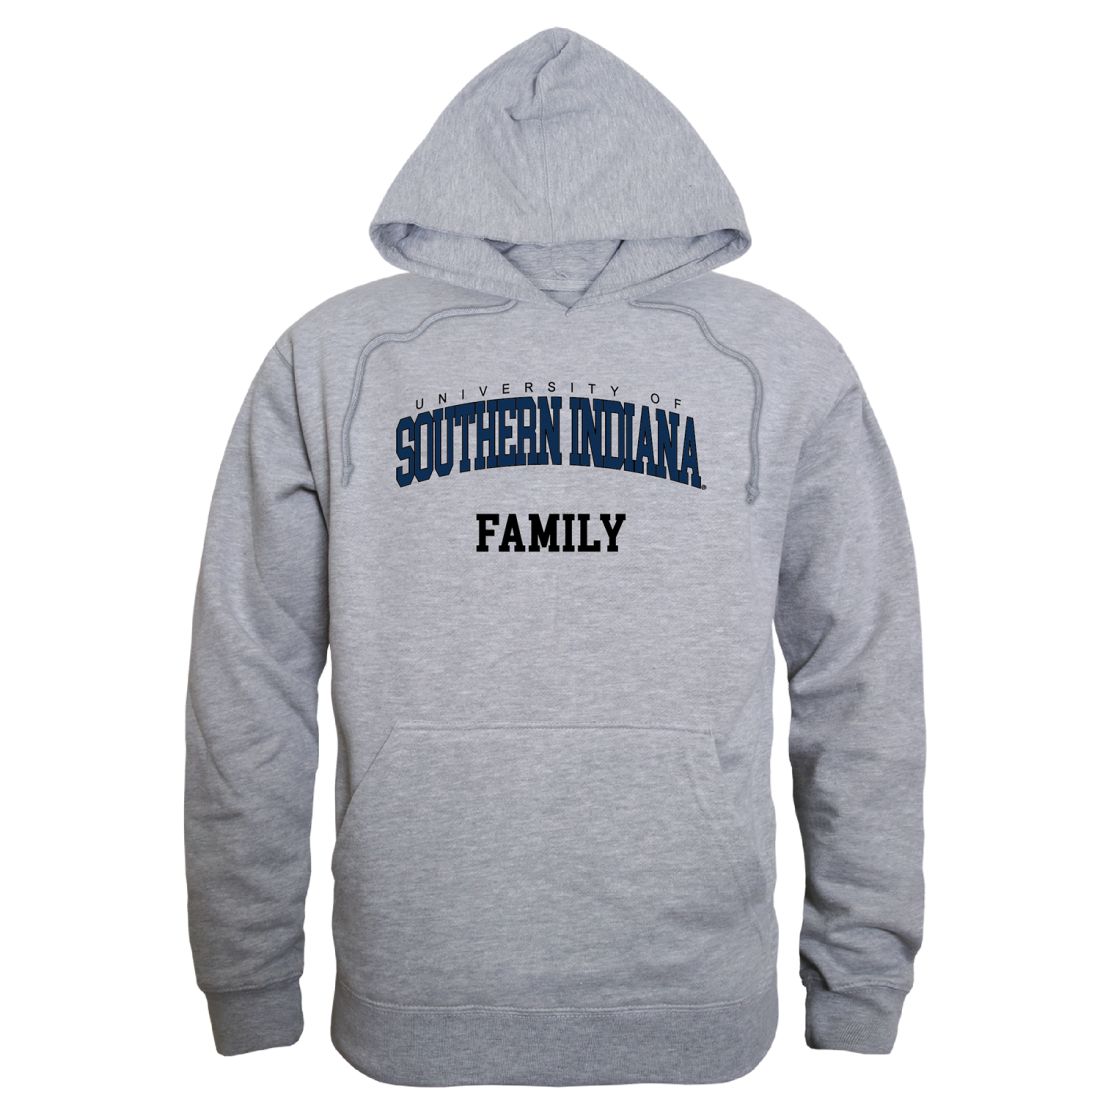 University of Southern Indiana Screaming Eagles Family Hoodie Sweatshirts